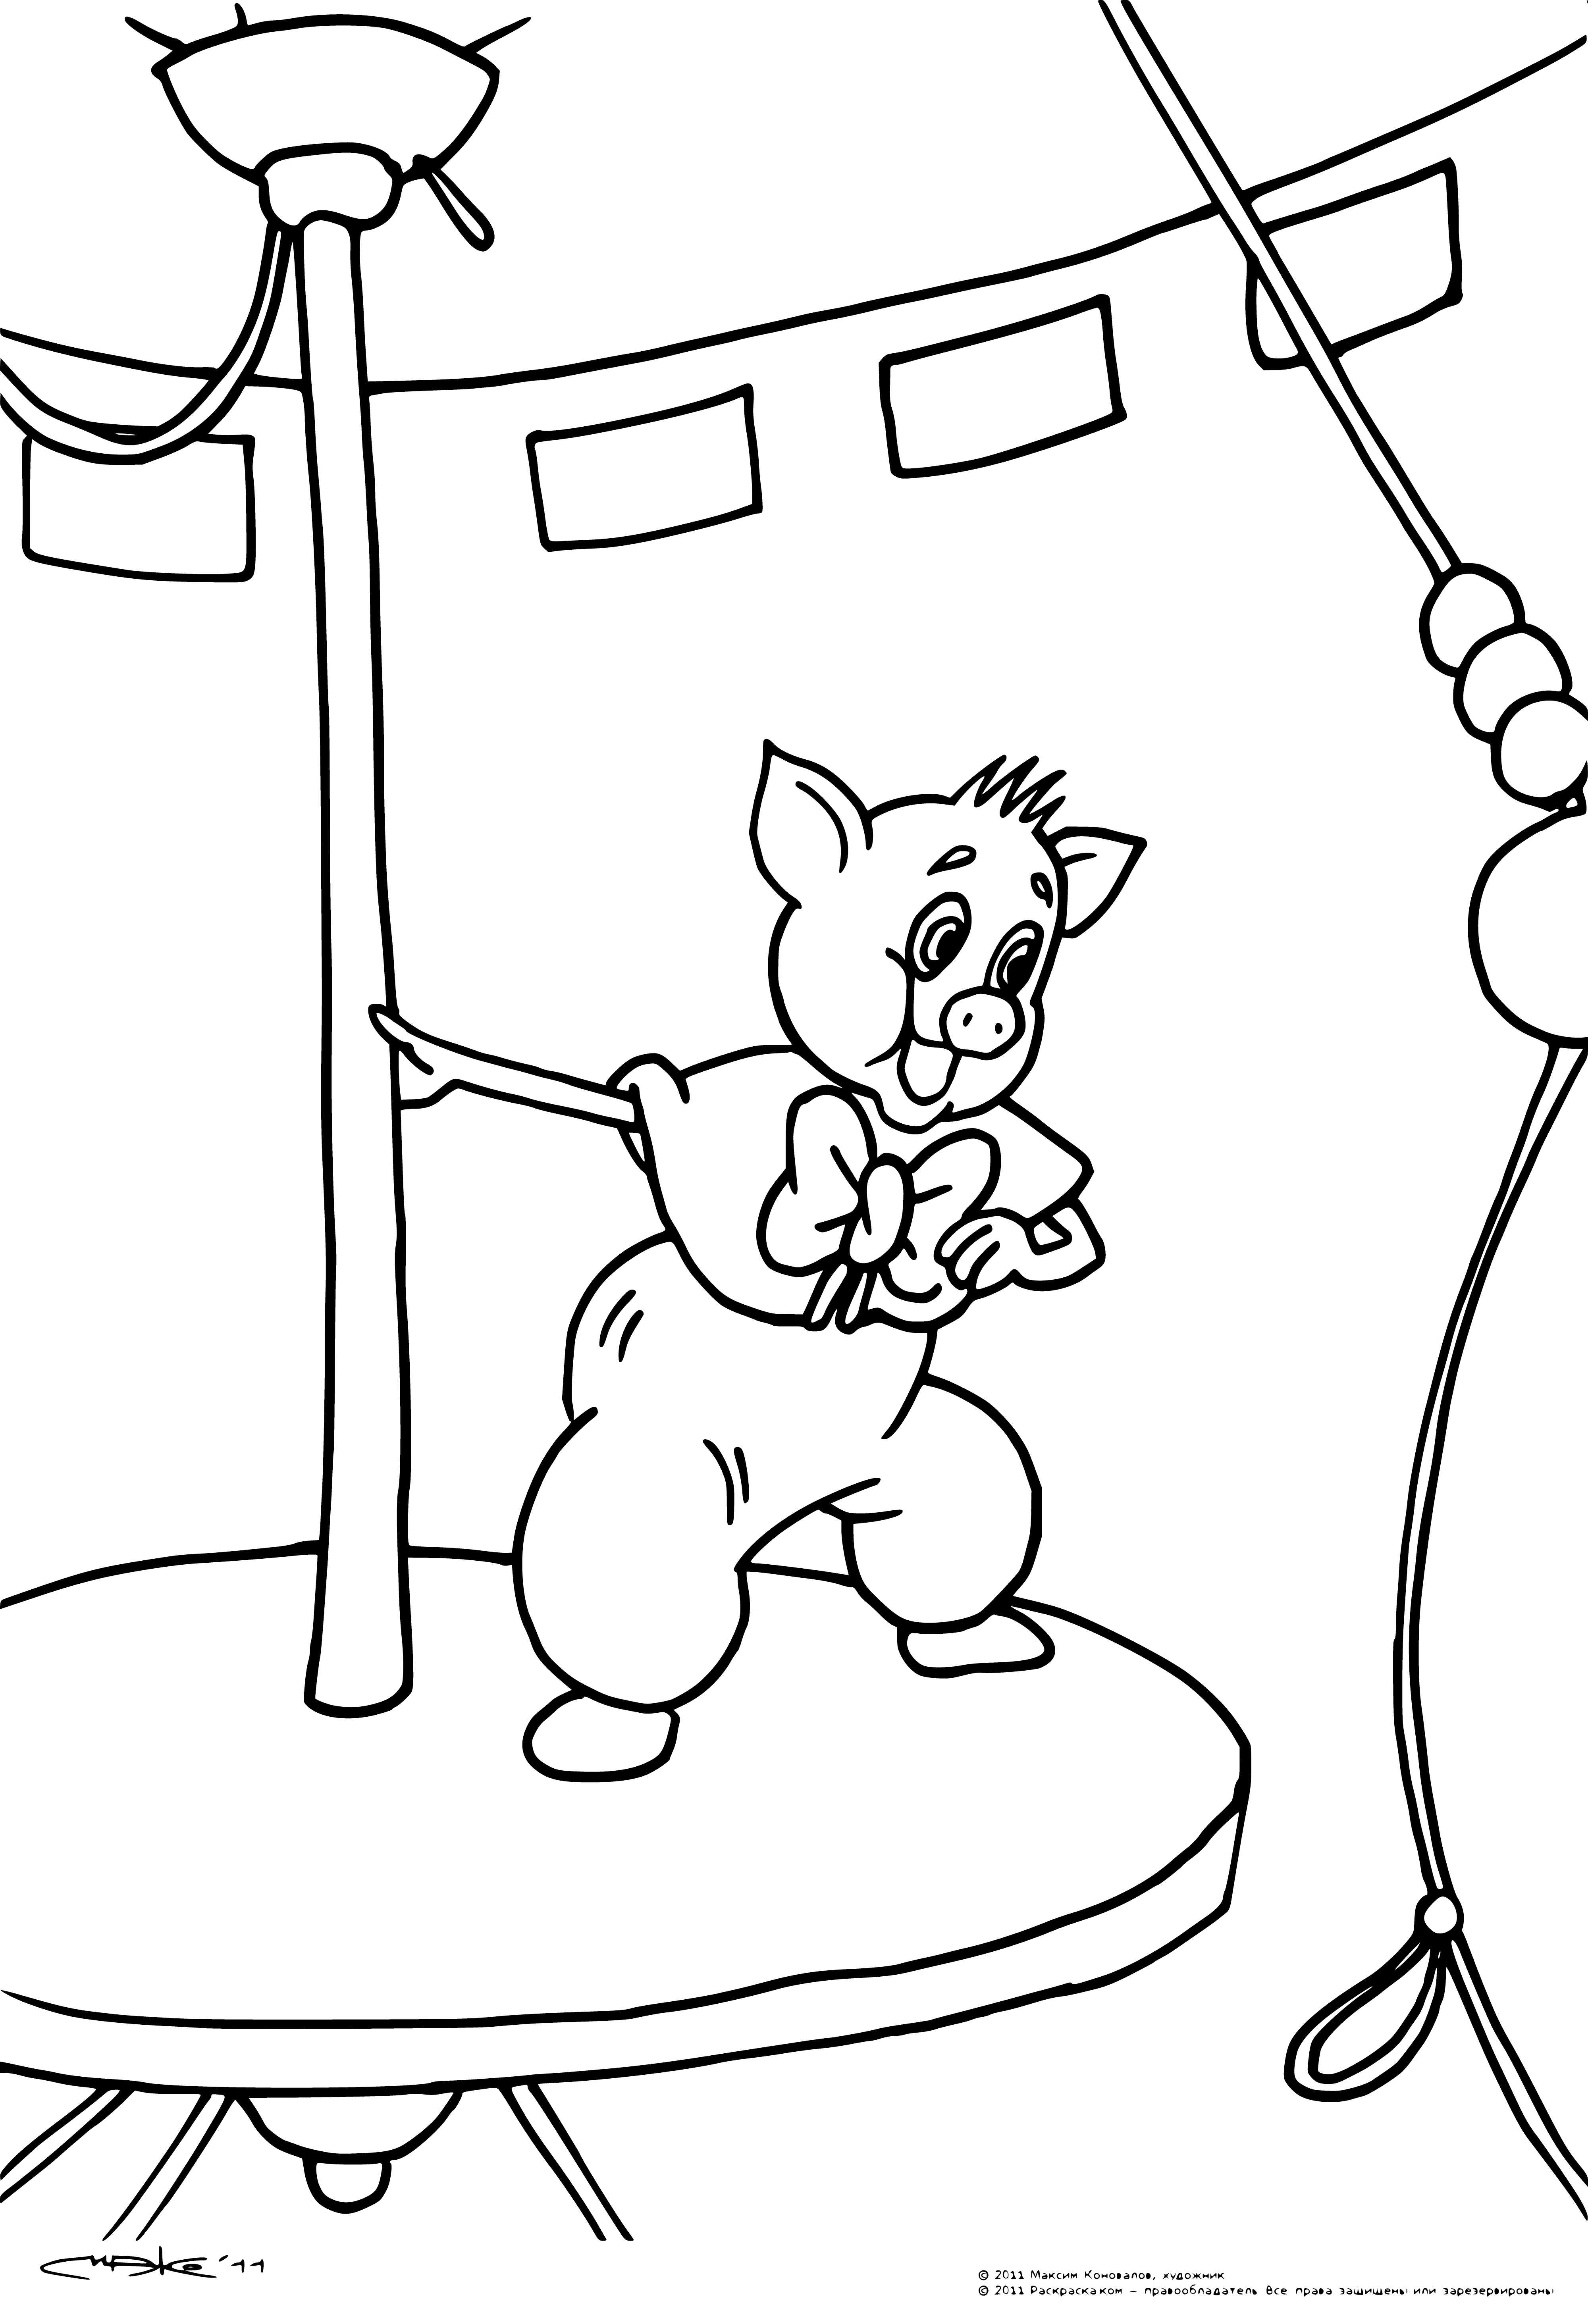 coloring page: Funtik is performing on stage, juggling three balls and wearing a red and white striped shirt, black pants, and red shoes. The audience is cheering!